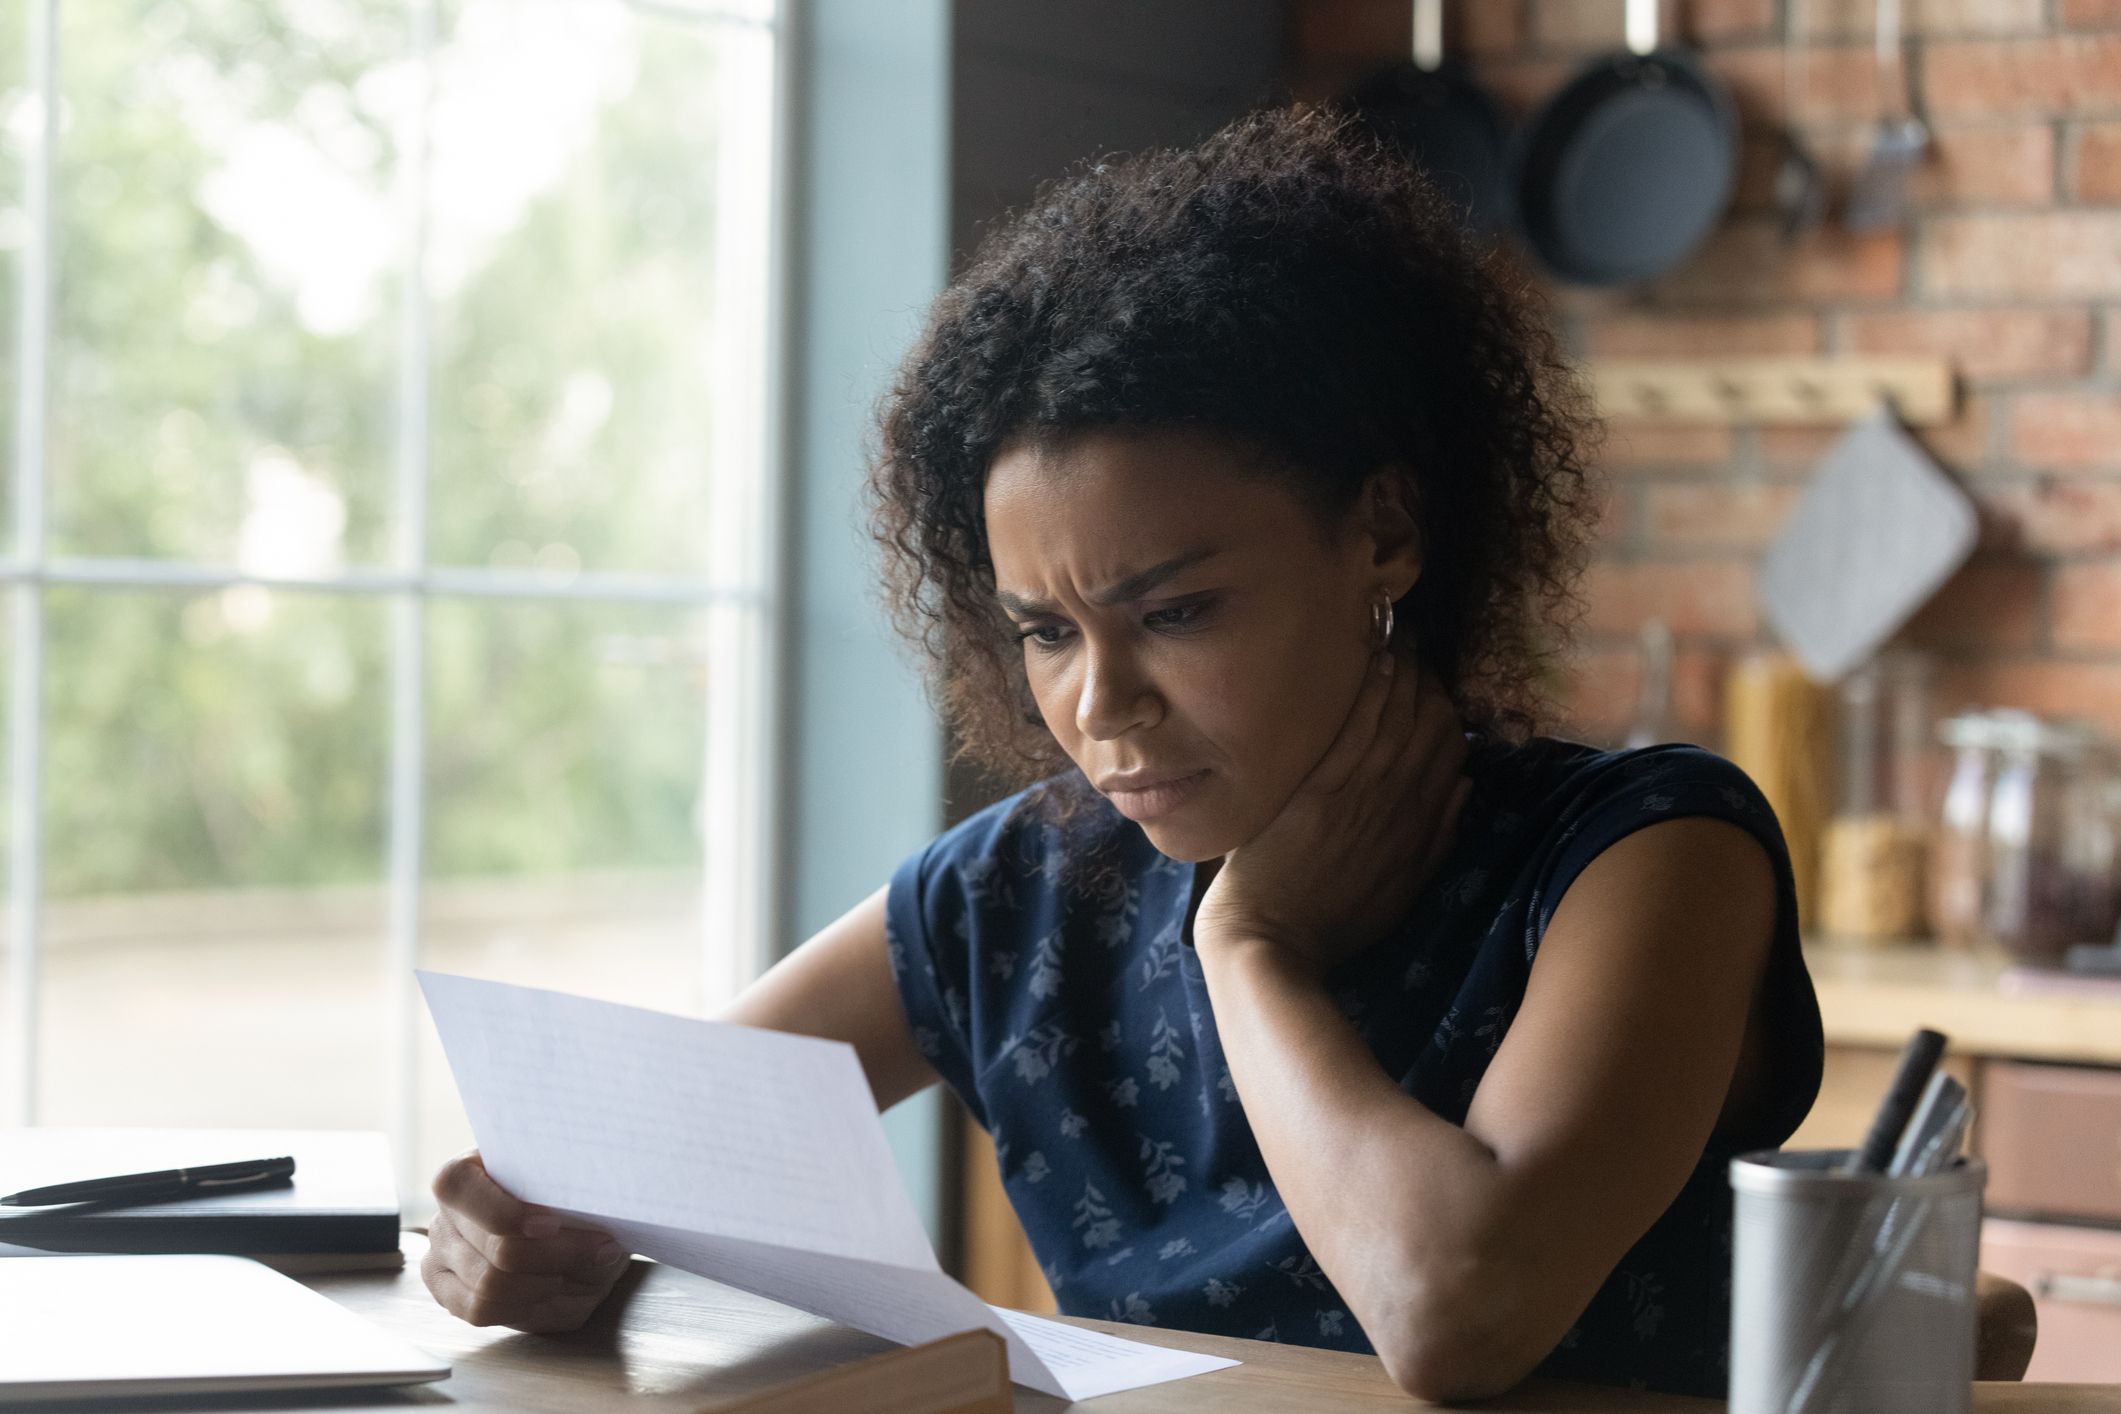 A woman with curly hair sits at her kitchen table and frowns at unexpected charges on her bill.